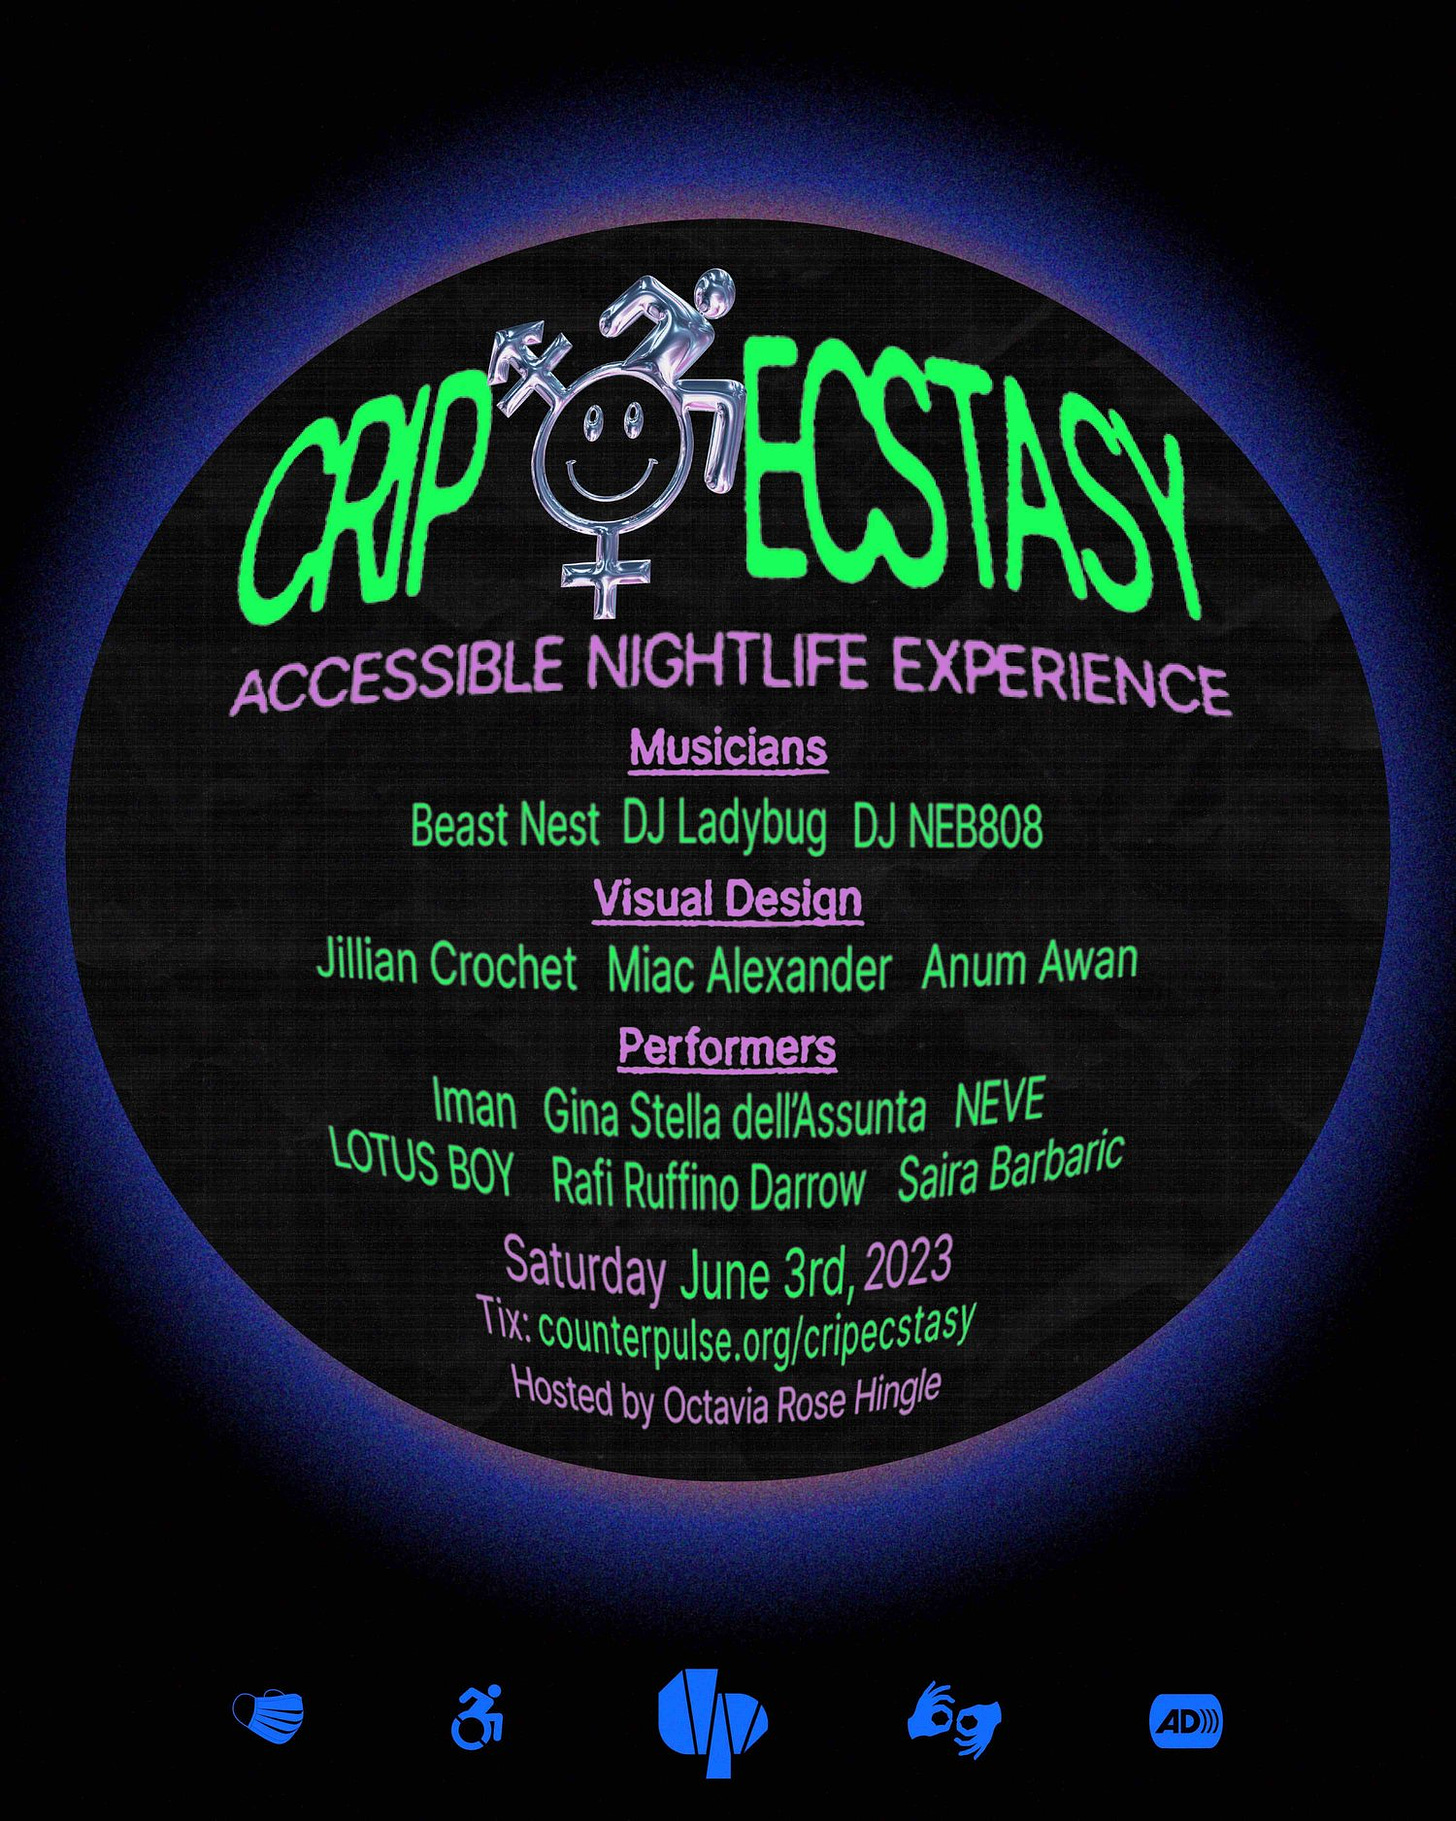 Lime green and pink text is placed inside a blue radient orb, along with a silver chrome design that combines the rave smiley, trans symbol and access symbol. Text reads " Crip Ecstasy, Accessible Nightlife Experience. Musicians: Beast Nest, DJ Ladybug, DJ NEB808. Visual Design: Jillian Crochet, Anum Awan, Miac Alexander. Performers: Iman, Gina Stella dell'Assunta, NEVE, LOTUS BOY, Rafi Ruffino Darrow, Sarai Barbaric. Hosted by Octavia Rose Hingle" with dates and ticket link included above. Blue symbols at the bottom for masked event, wheelchair access, ASL interpretation, audio description and Counterpulse logo.